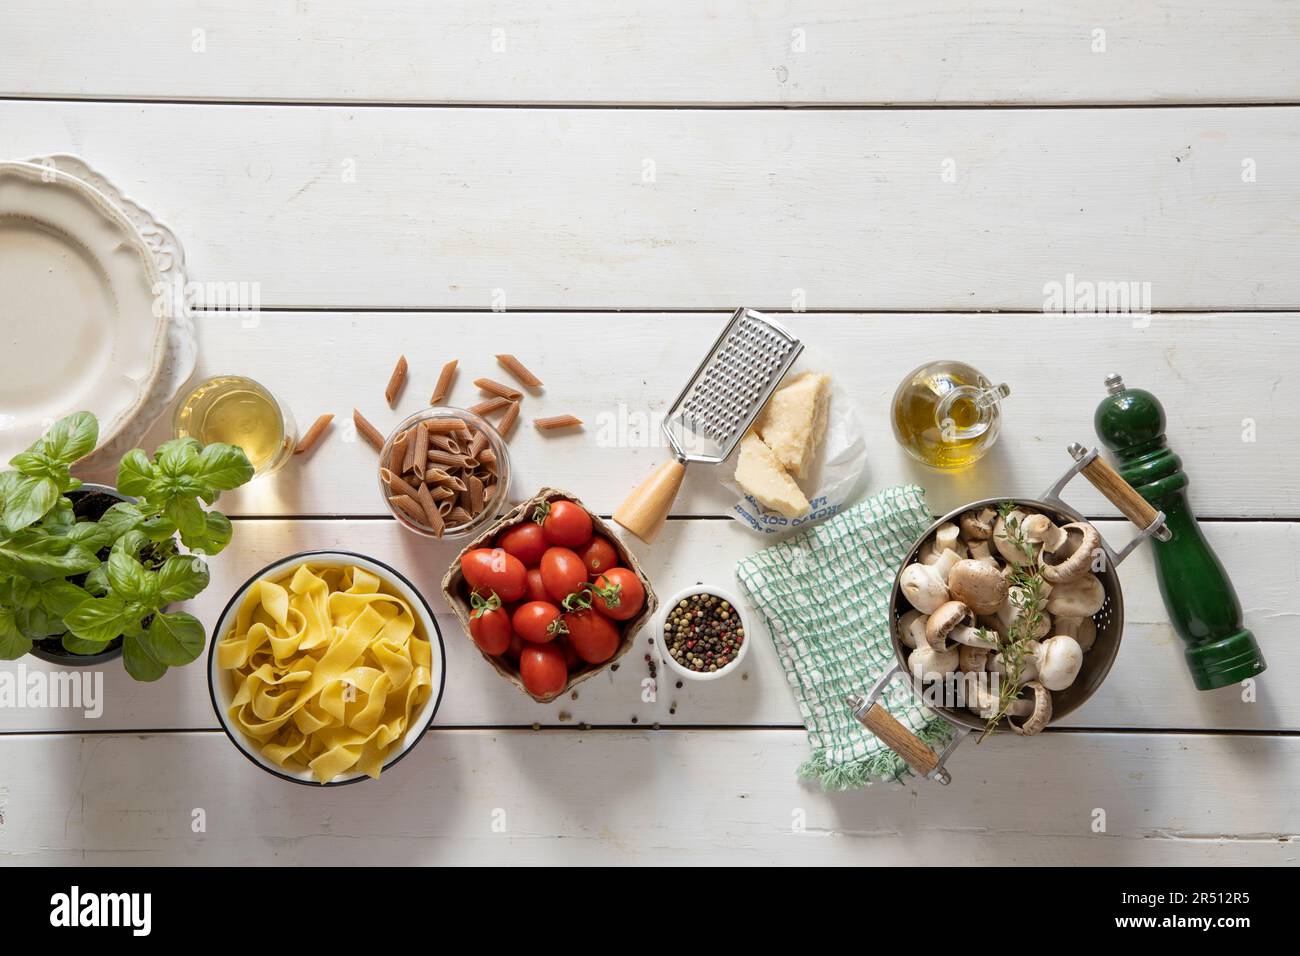 Ingredients for pasta dishes Stock Photo